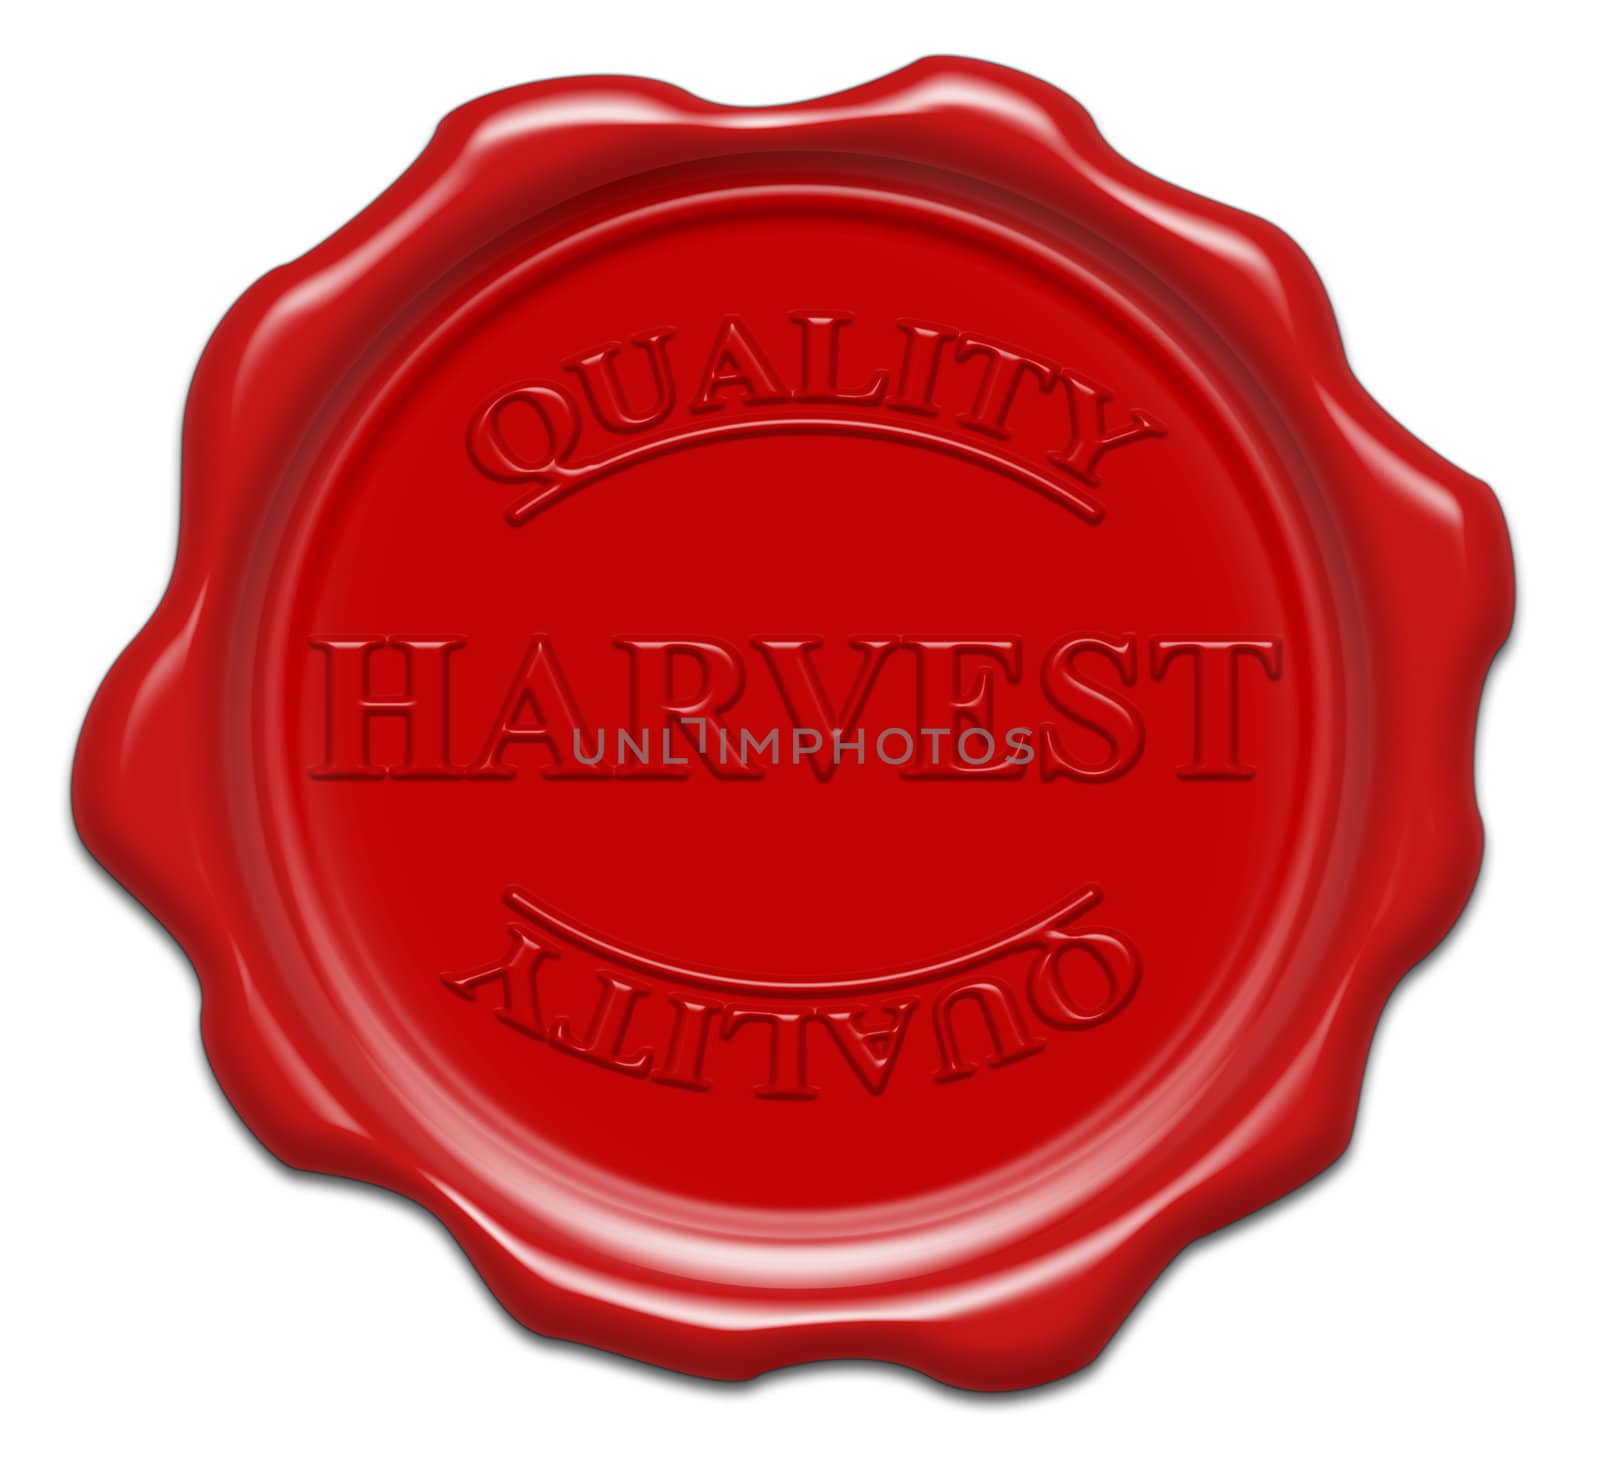 quality harvest - illustration red wax seal isolated on white background with word : harvest